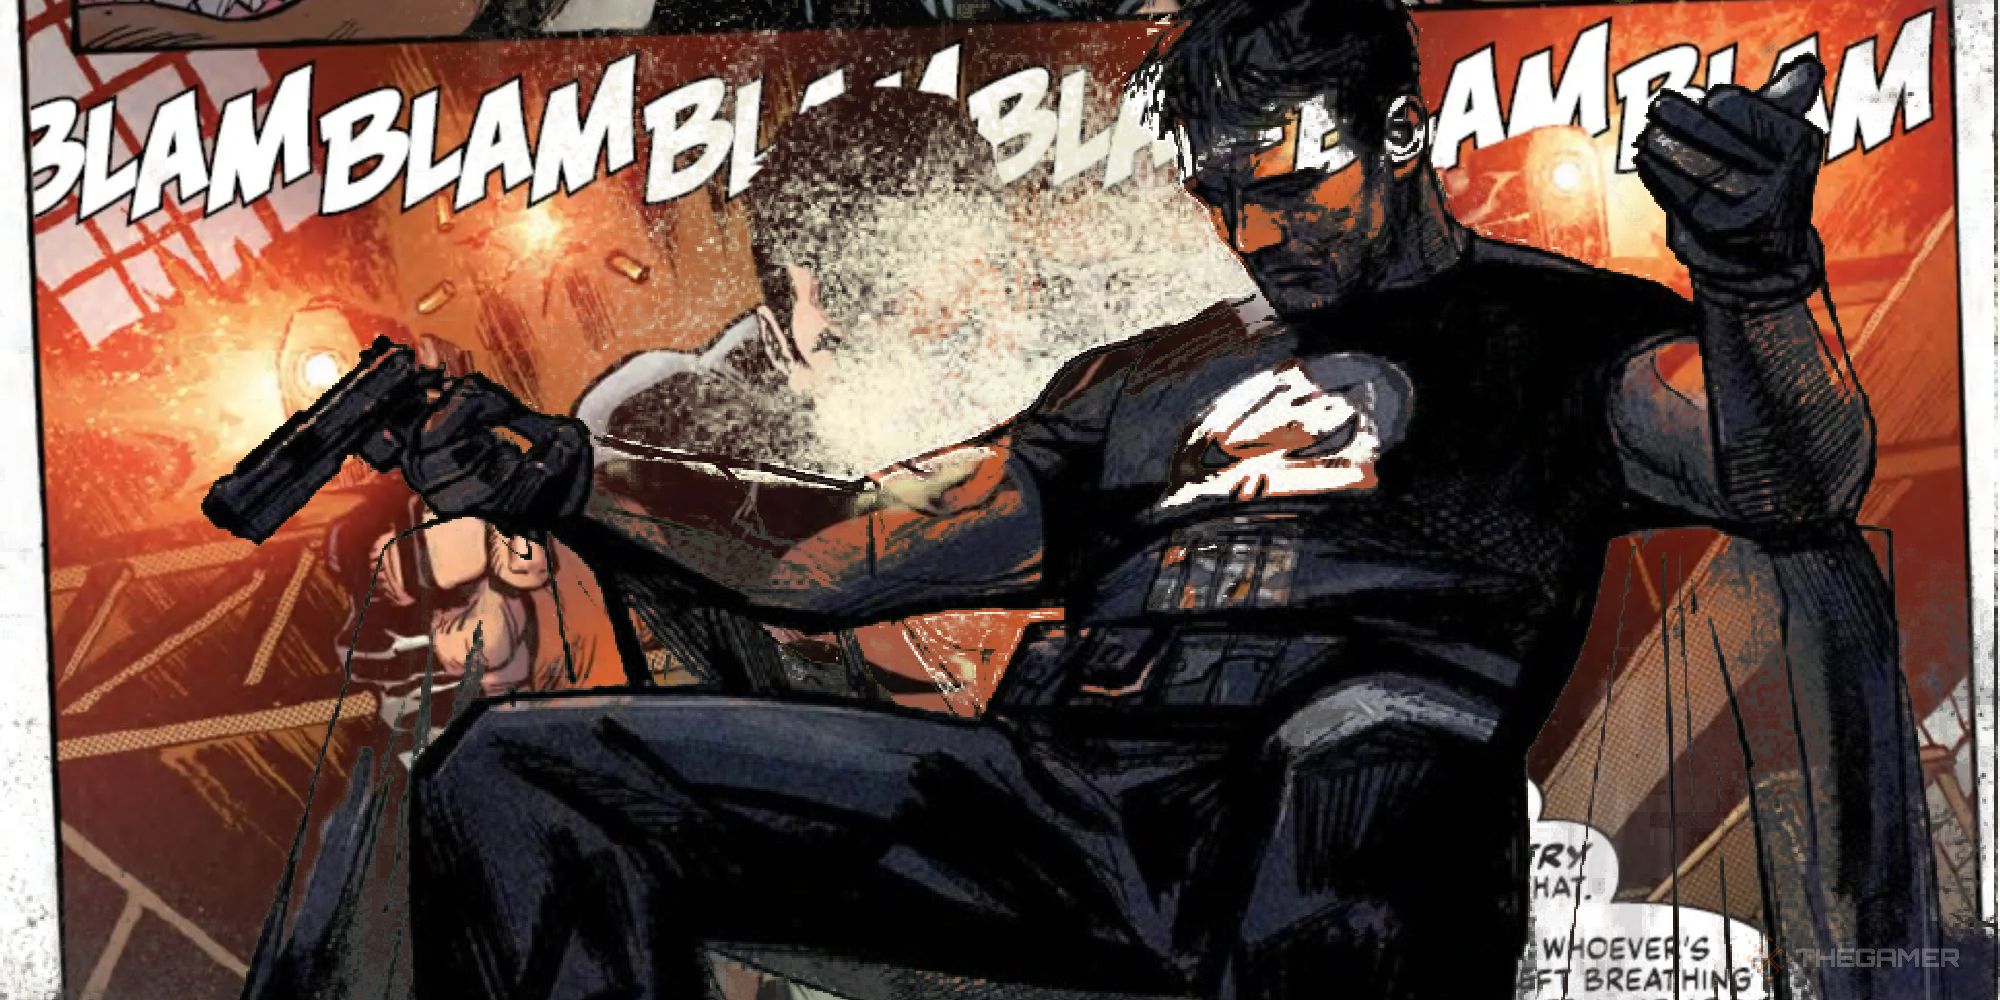 comic book frank castle in a bloody t-shirt, sat down with his arms raised and legs spread